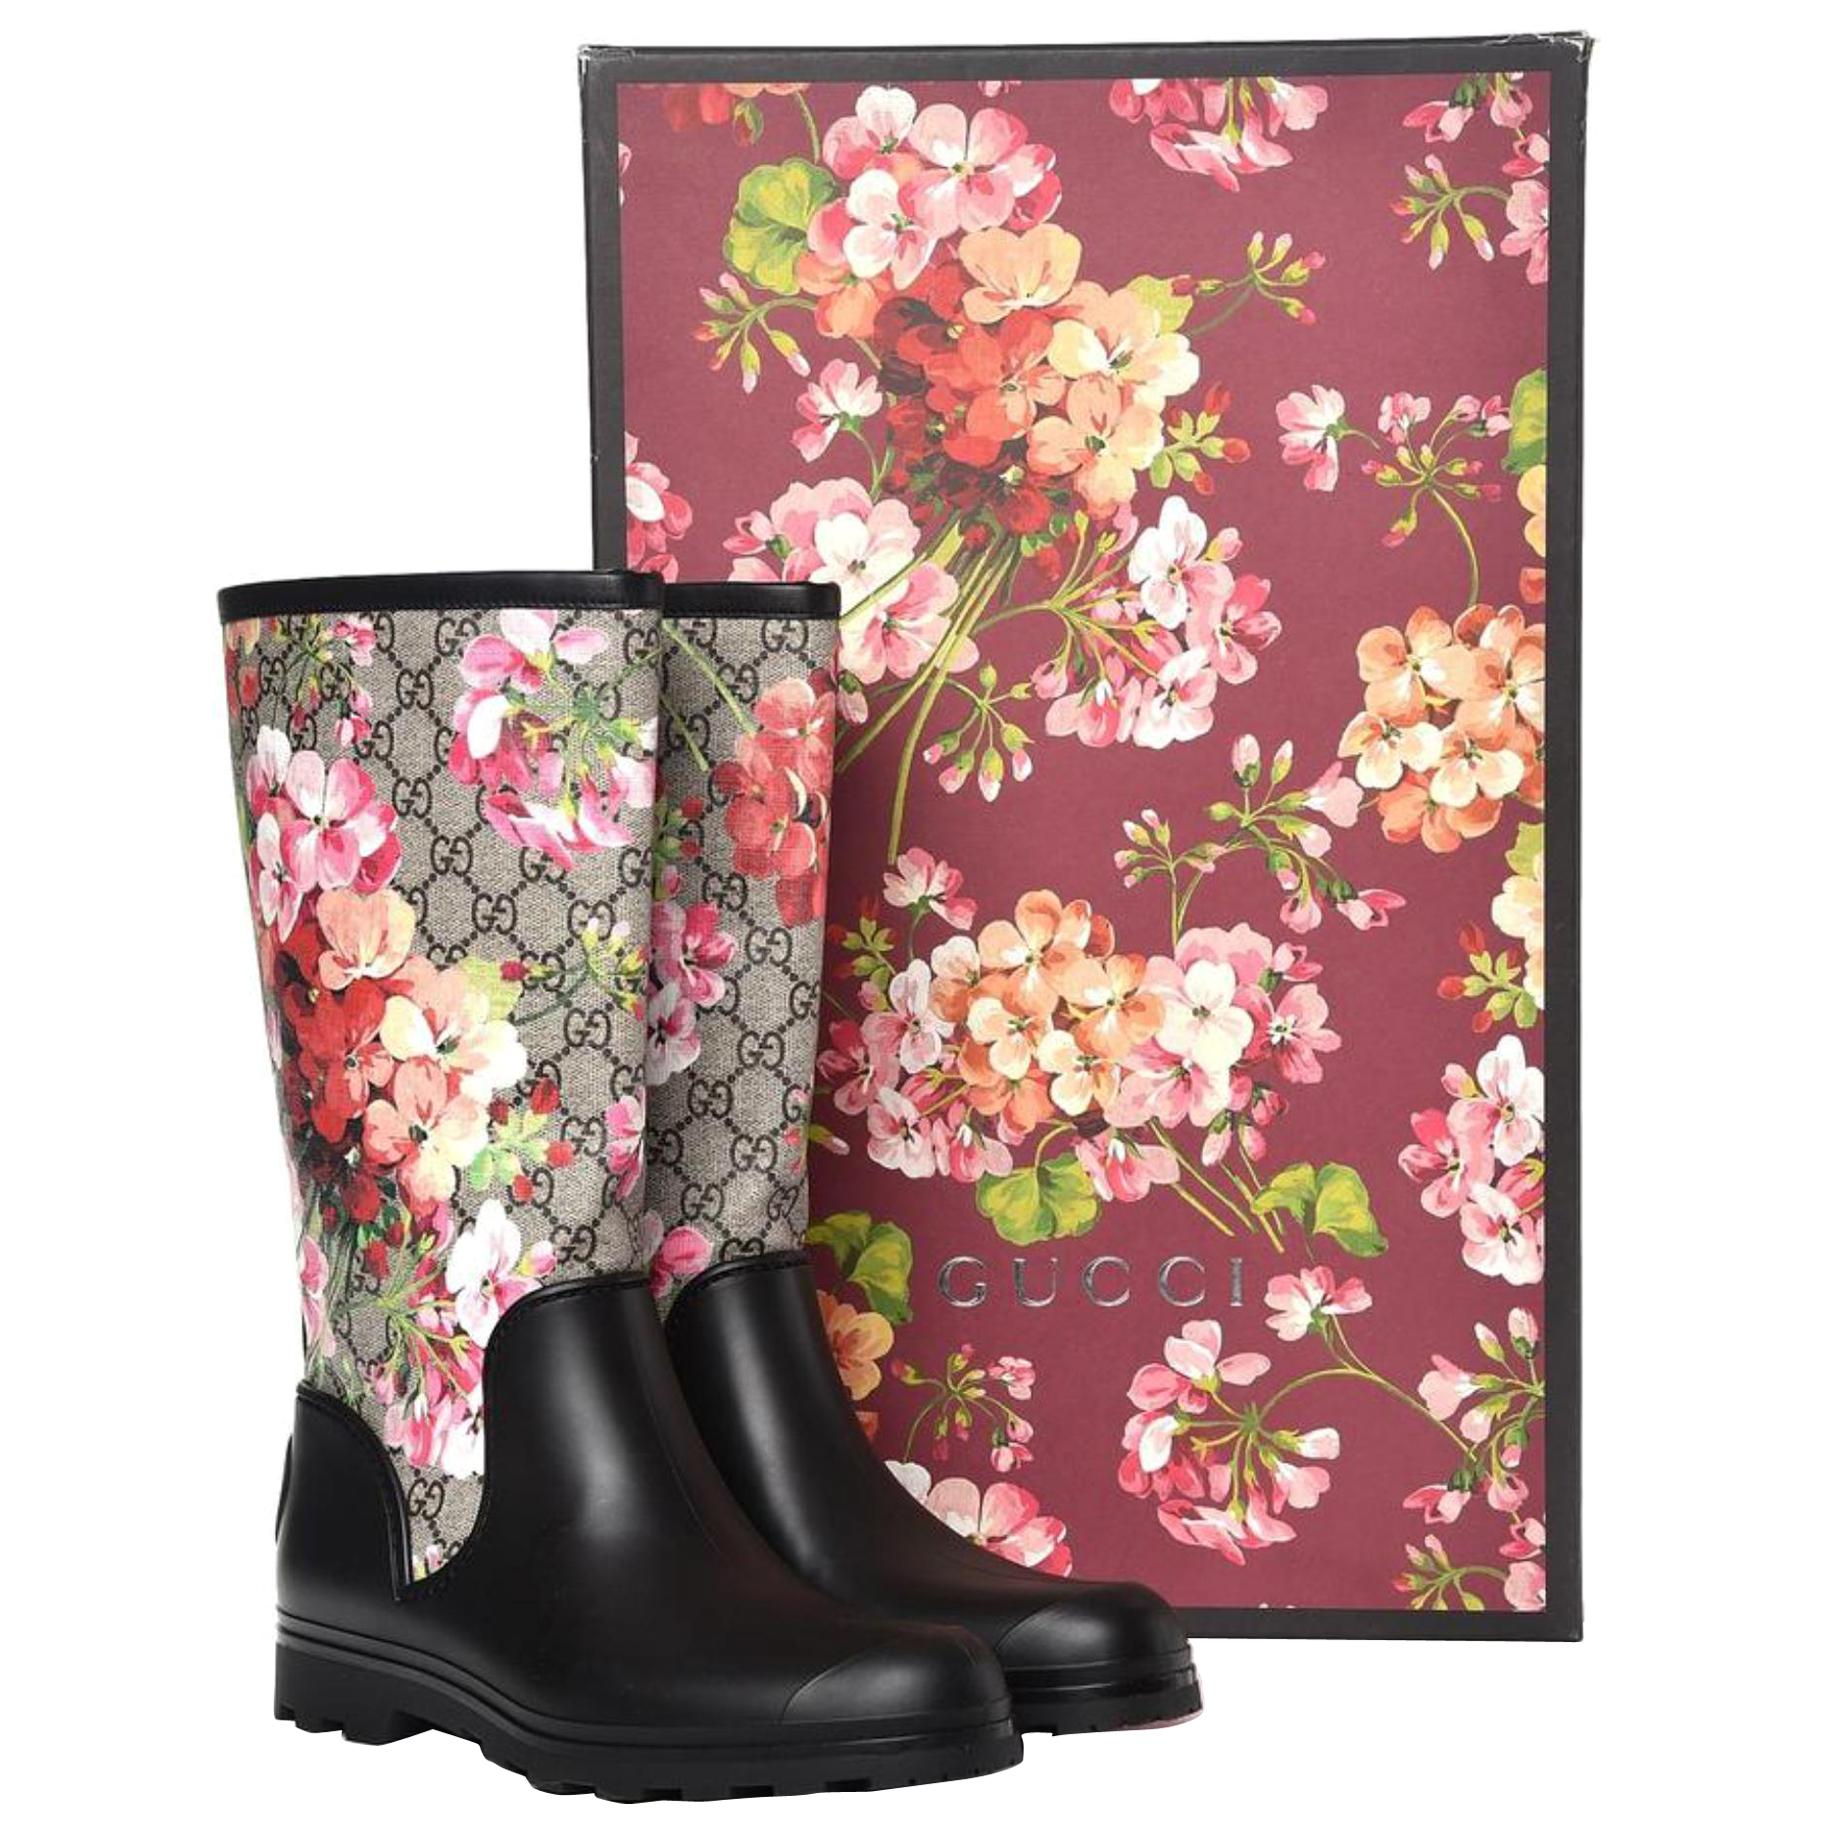 Gucci Black Limited Supreme Prato Gg Blooms Rain Boots/Booties 24684511 For Sale